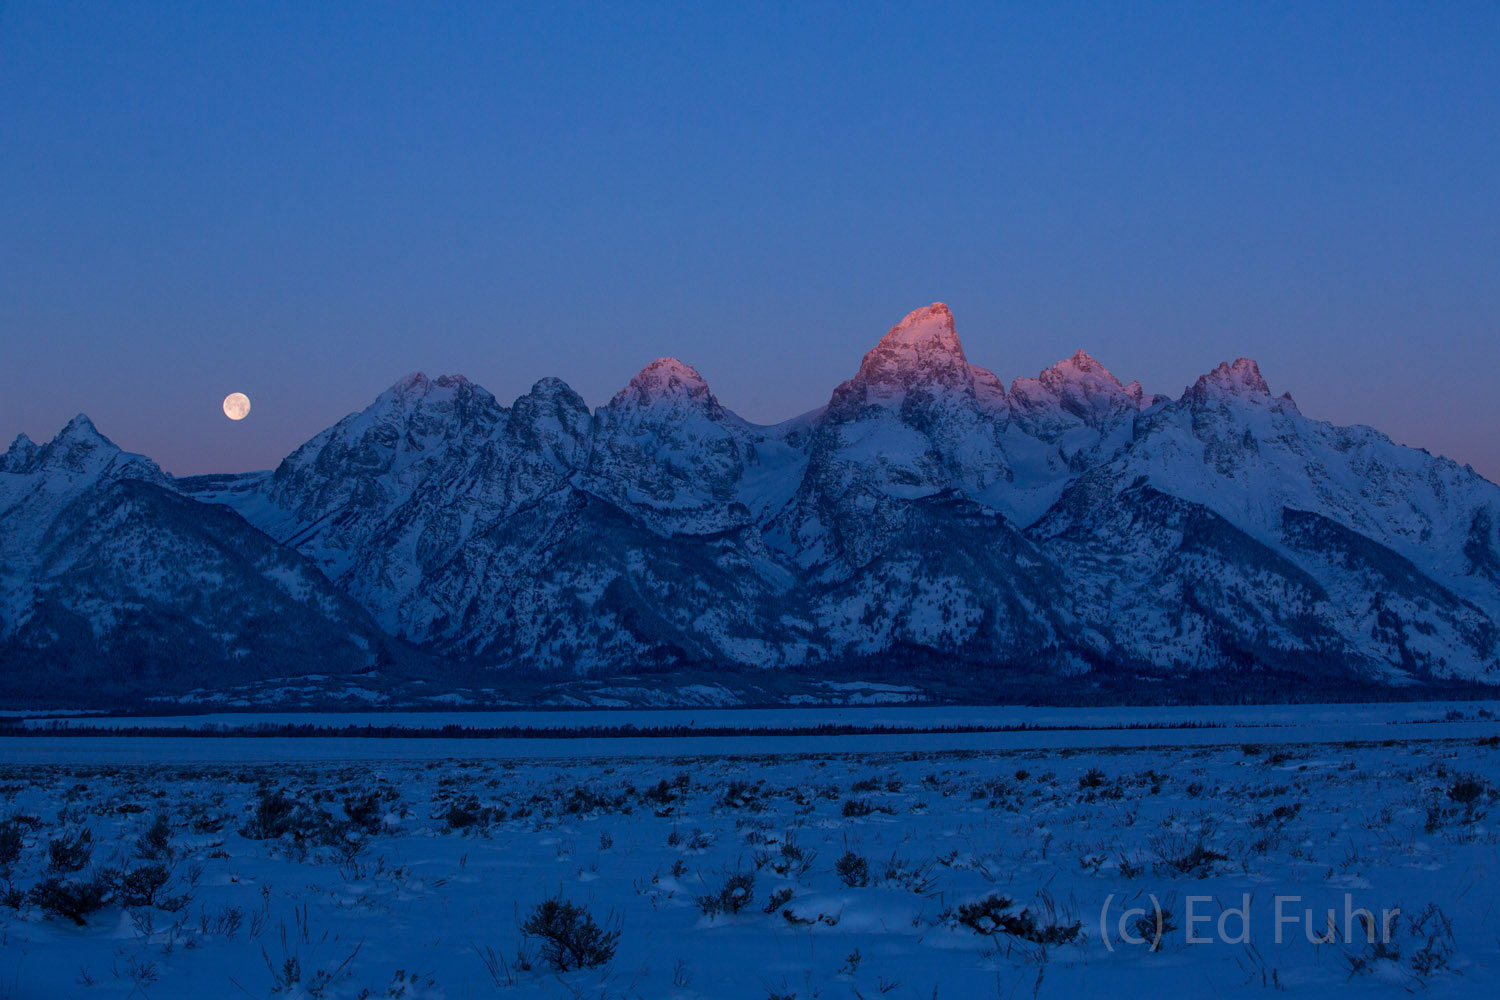 The very tip of the Grand Teton catches the first ray of winter light.